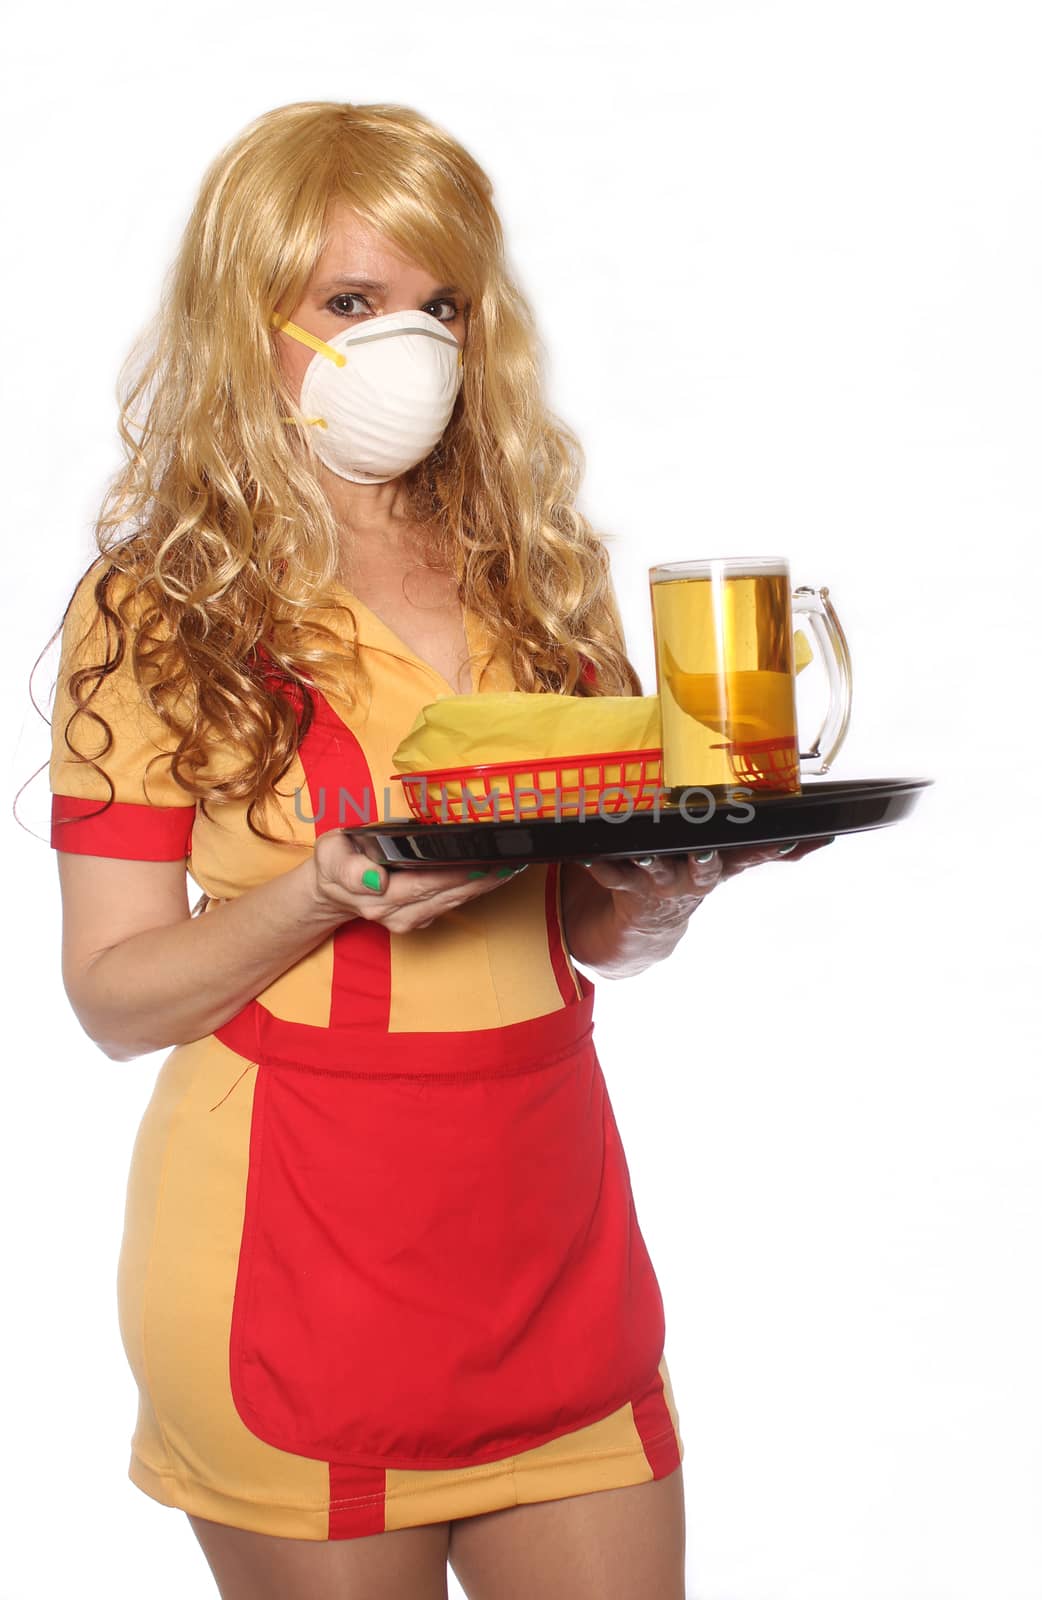 Restaurant and Bar Waitress Wearing Face Mask To Prevent illness